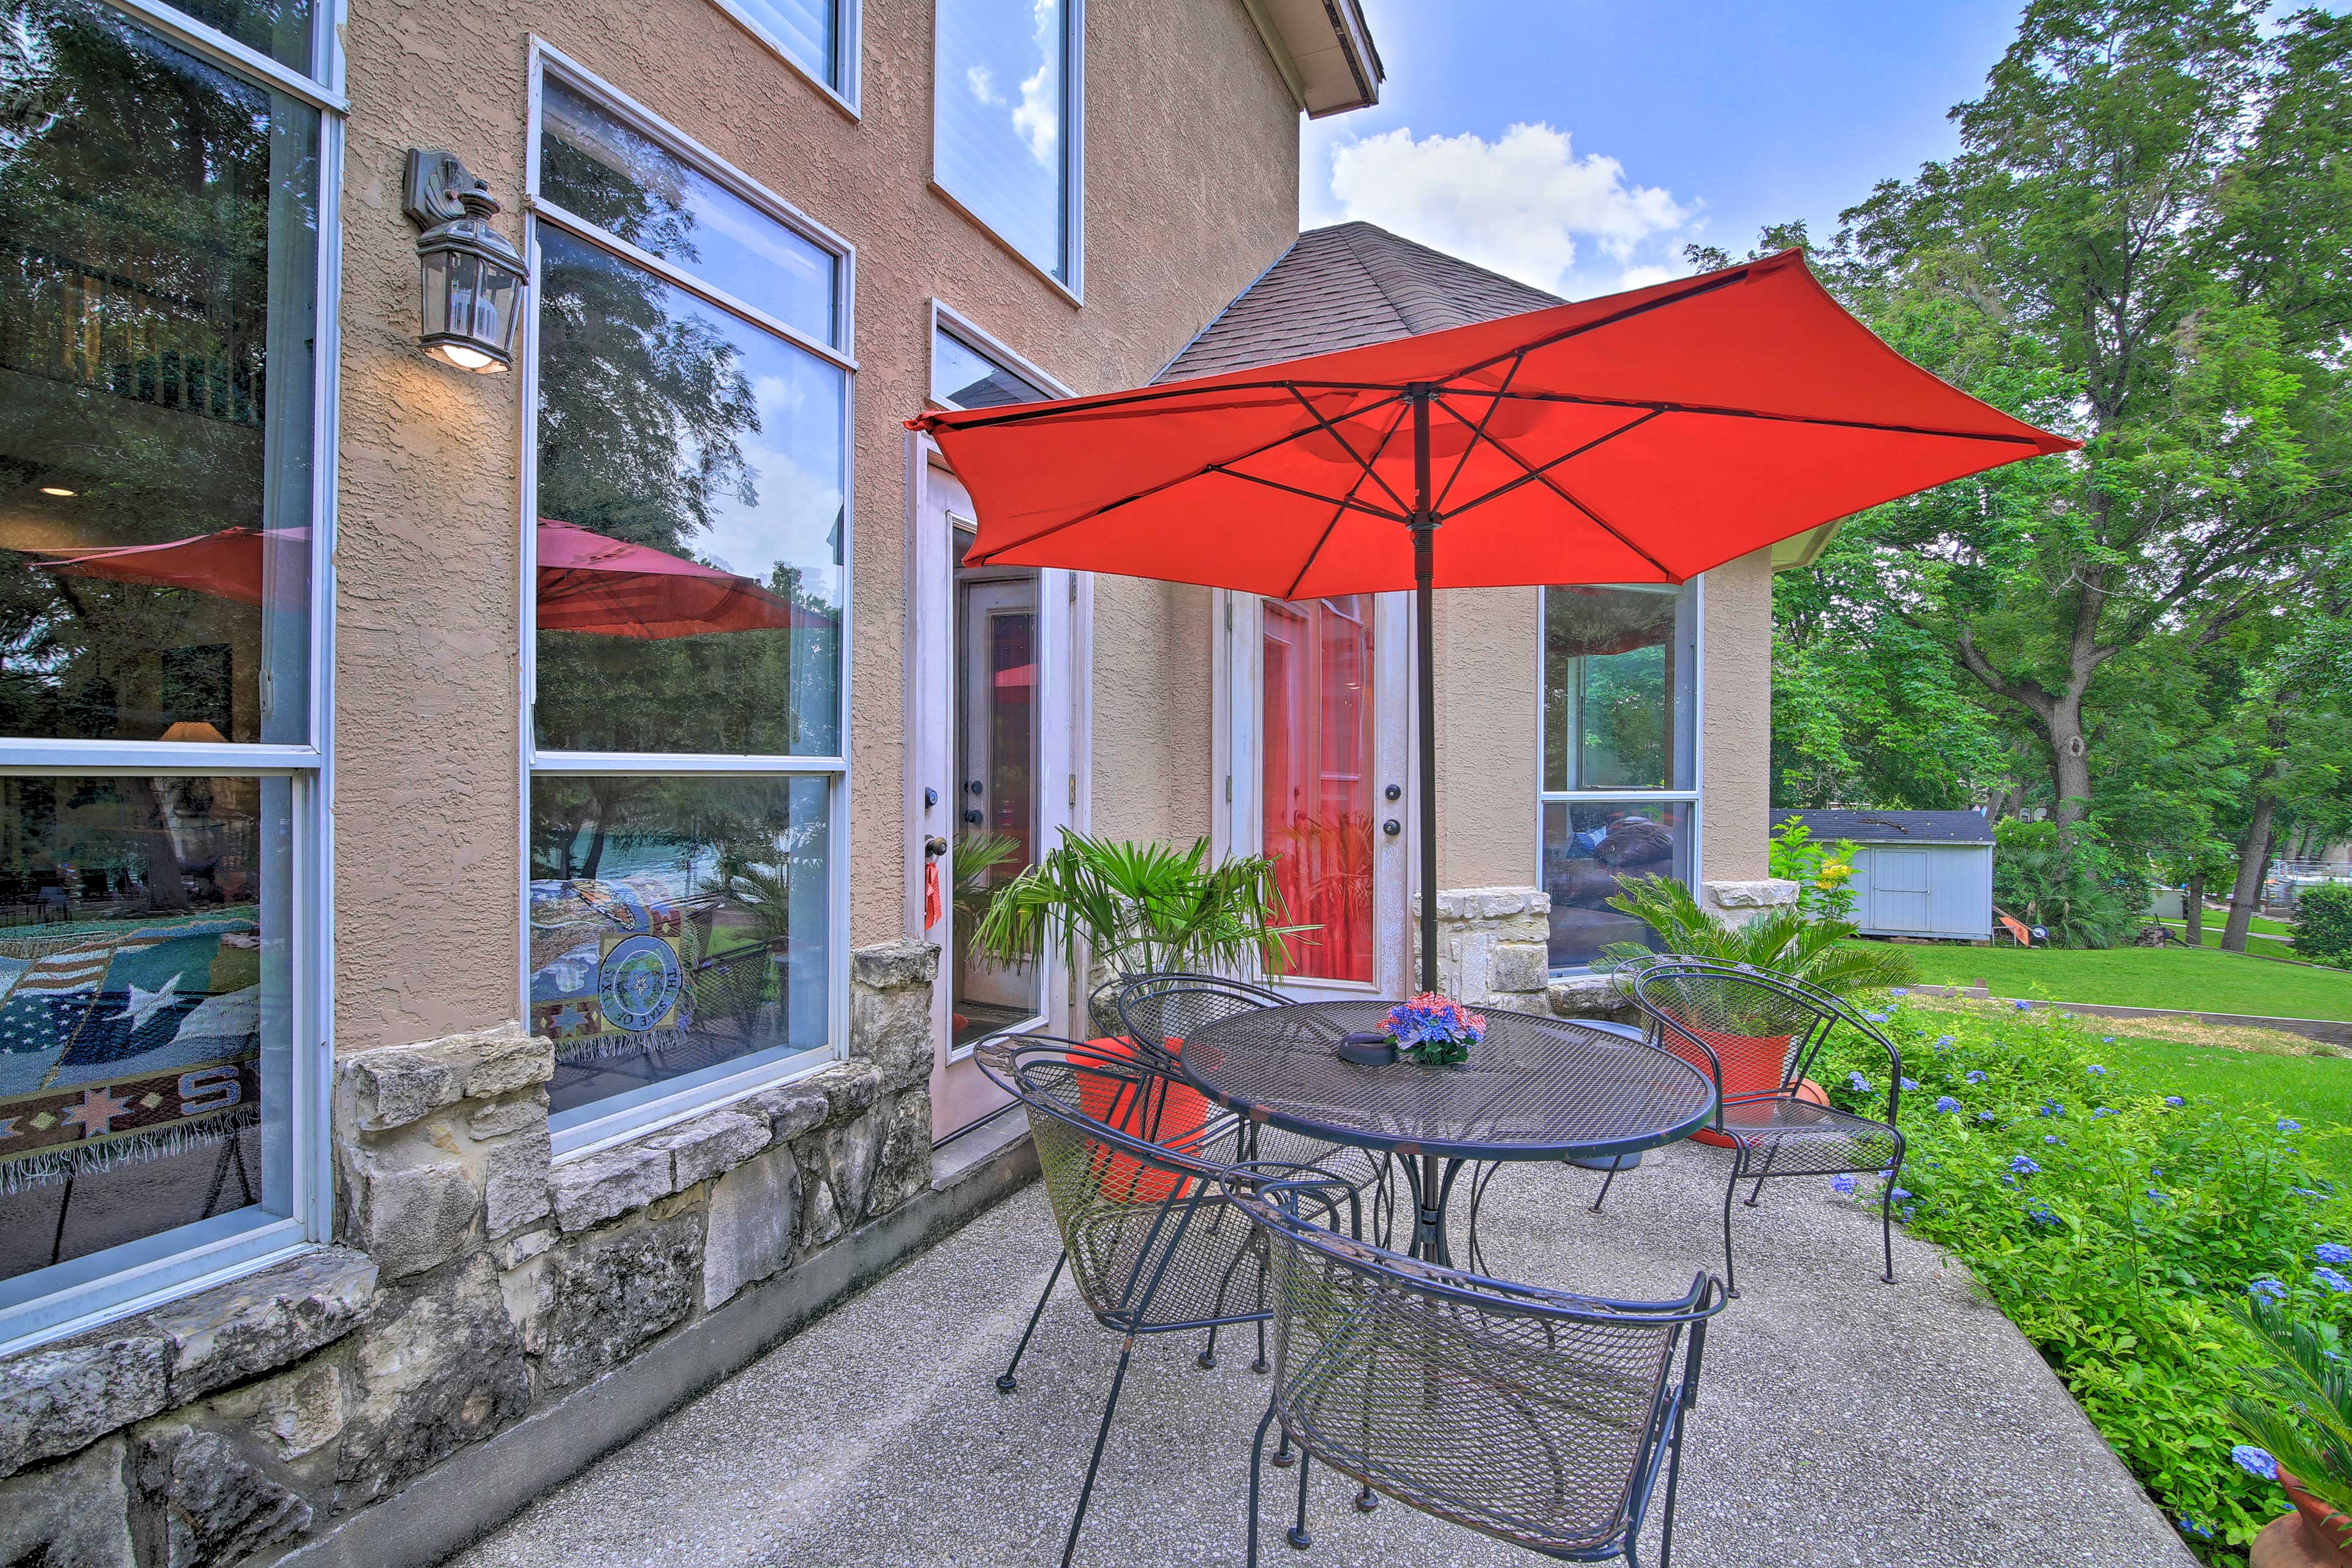 You'll love the abundant outdoor seating.